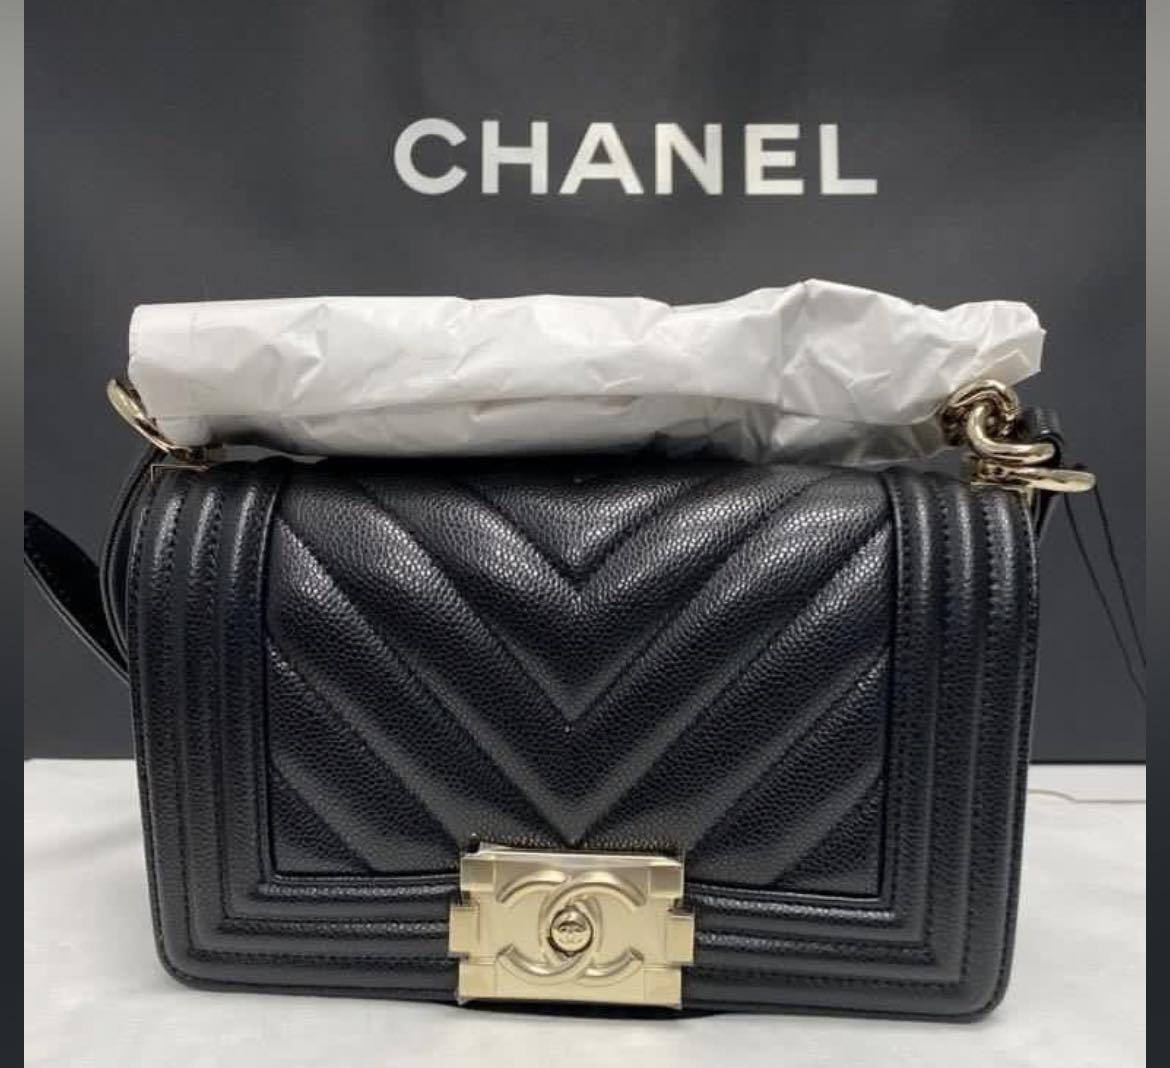 Chanel Crown Flap Bag in Black Calfskin with Antiqued Gold